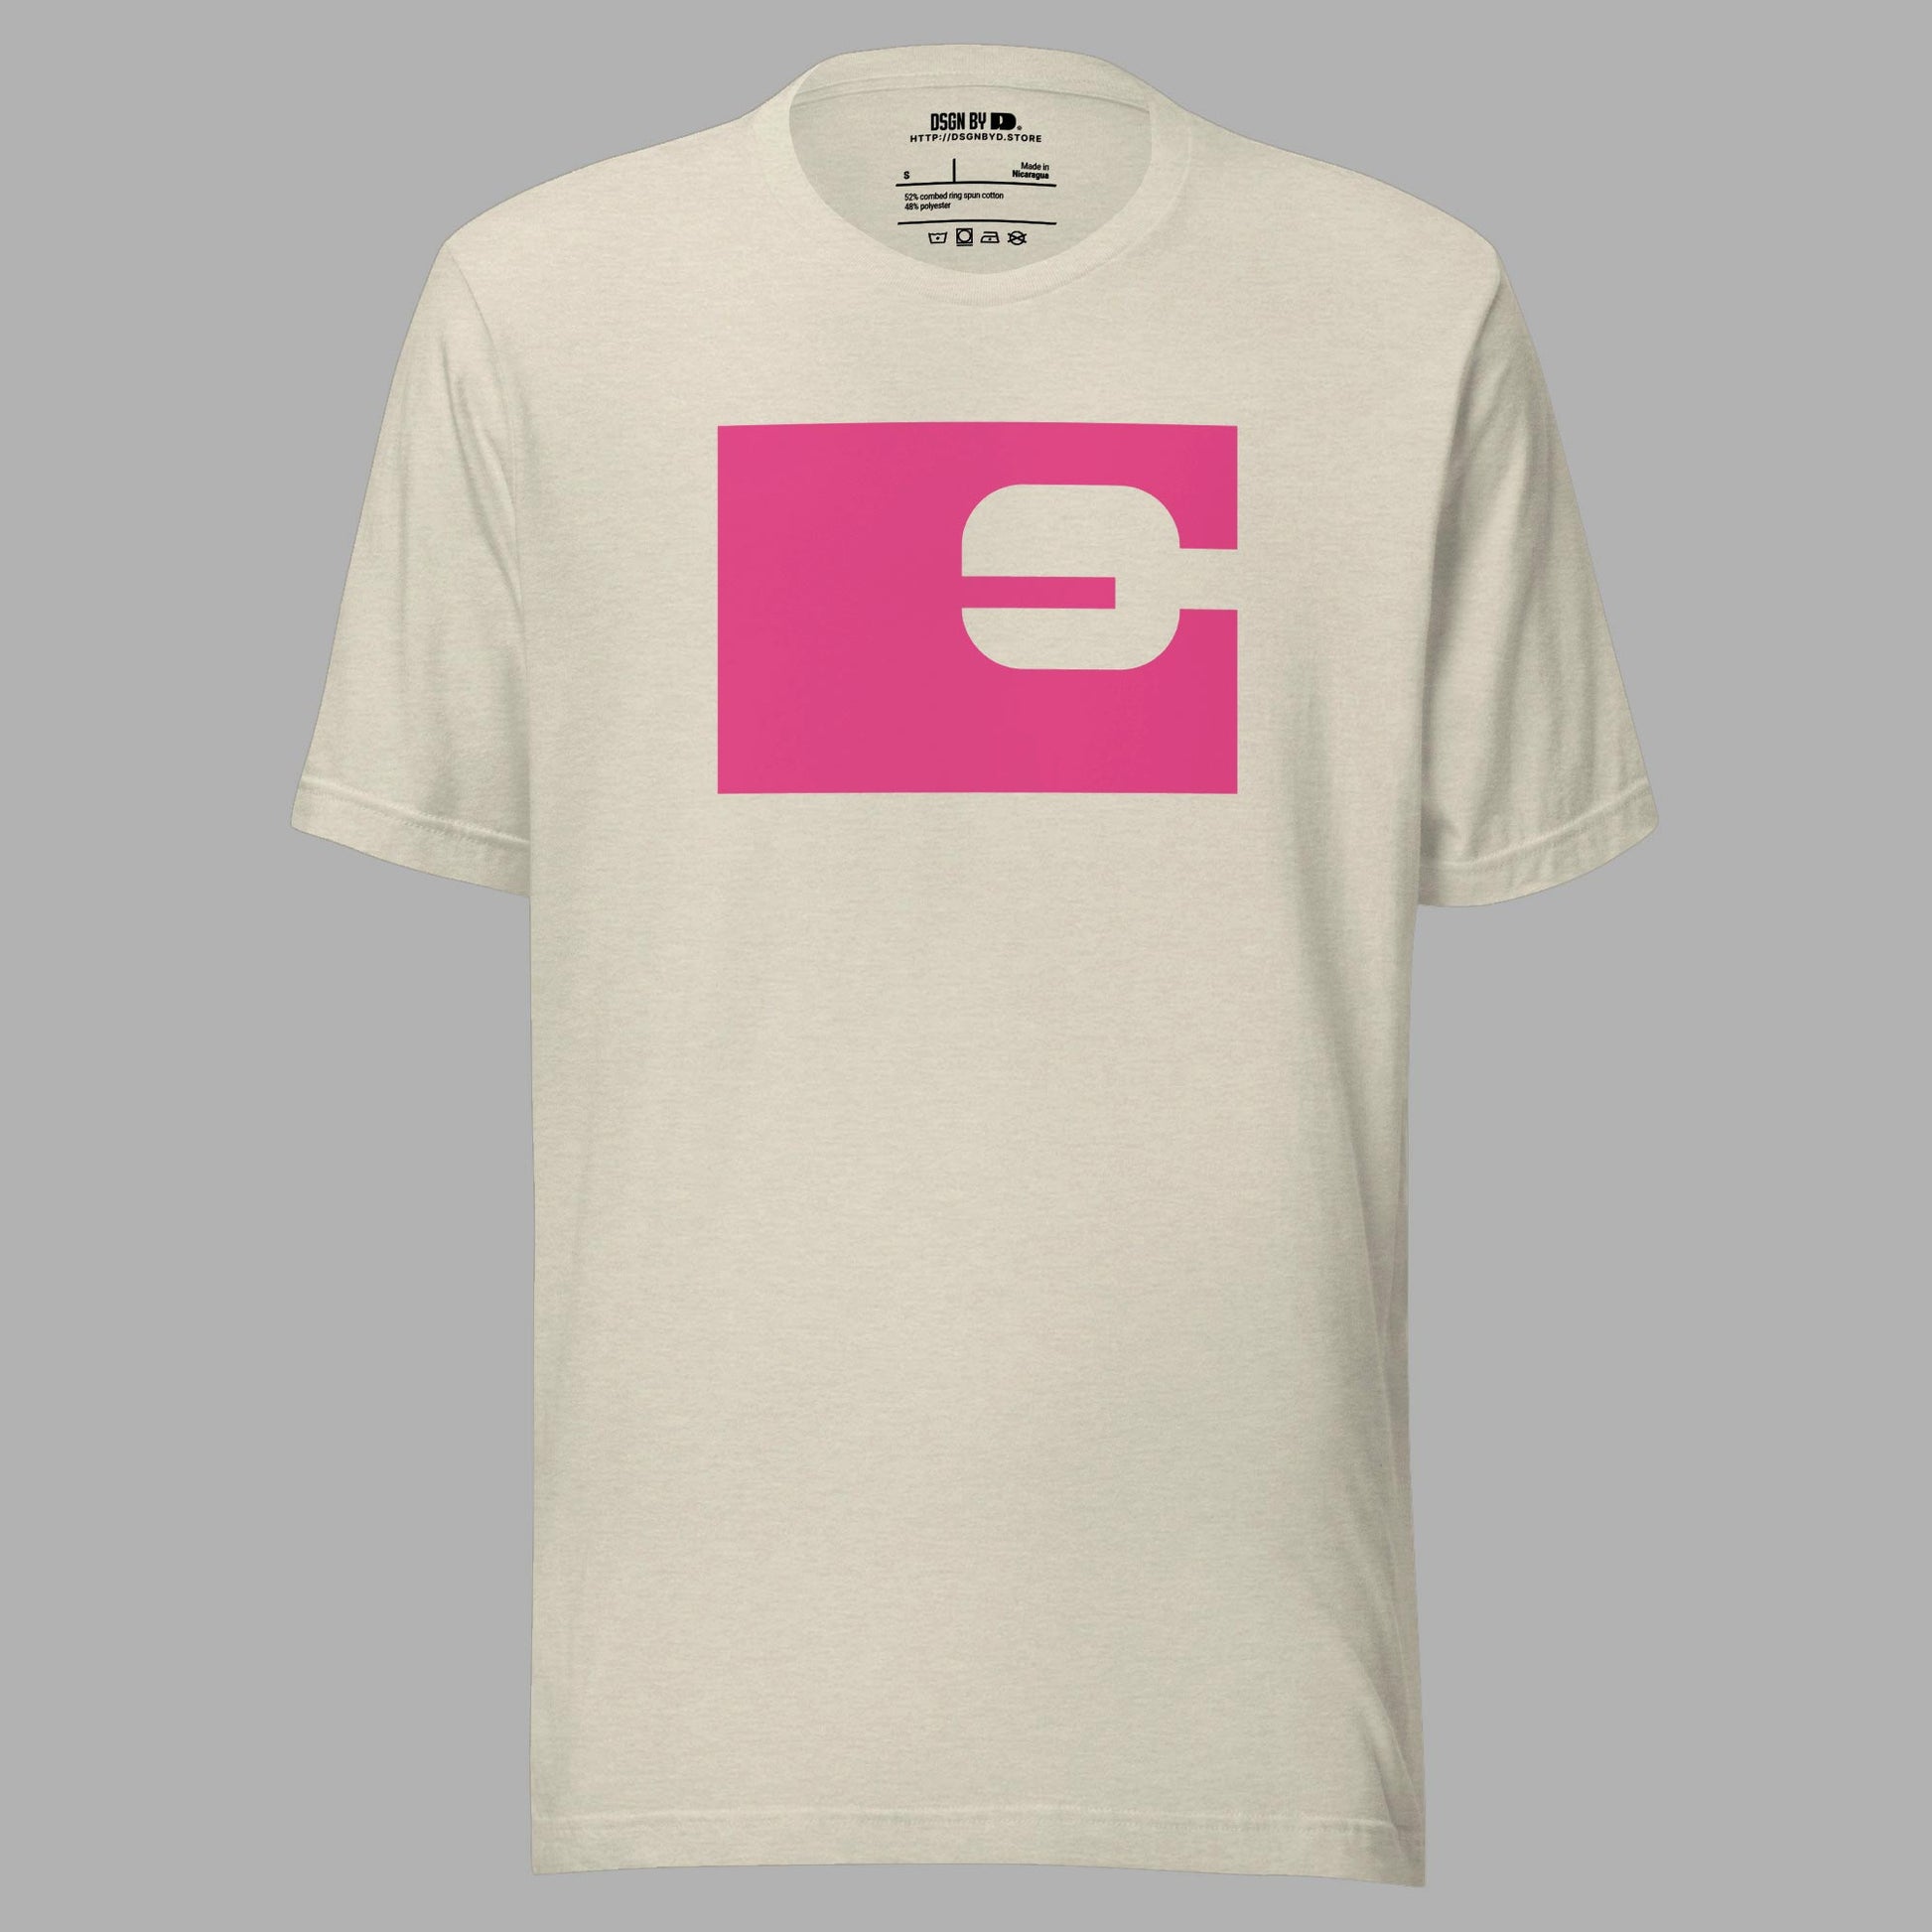 A beige cotton unisex graphic tee with letter E.